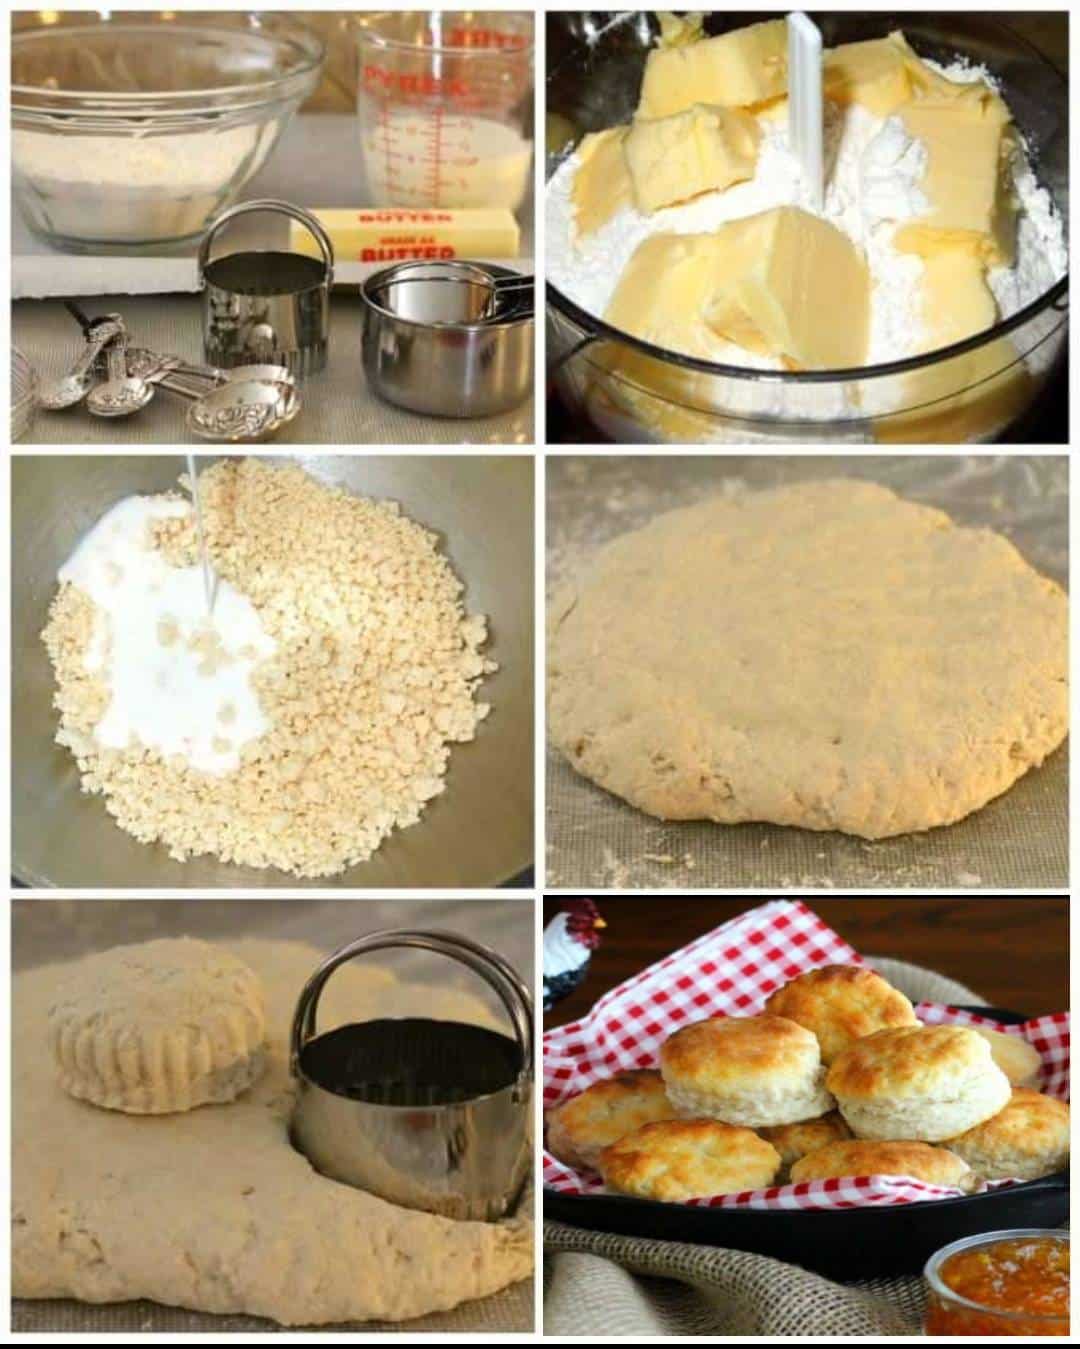 FLUFFY SOUTHERN BUTTERMILK BISCUITS